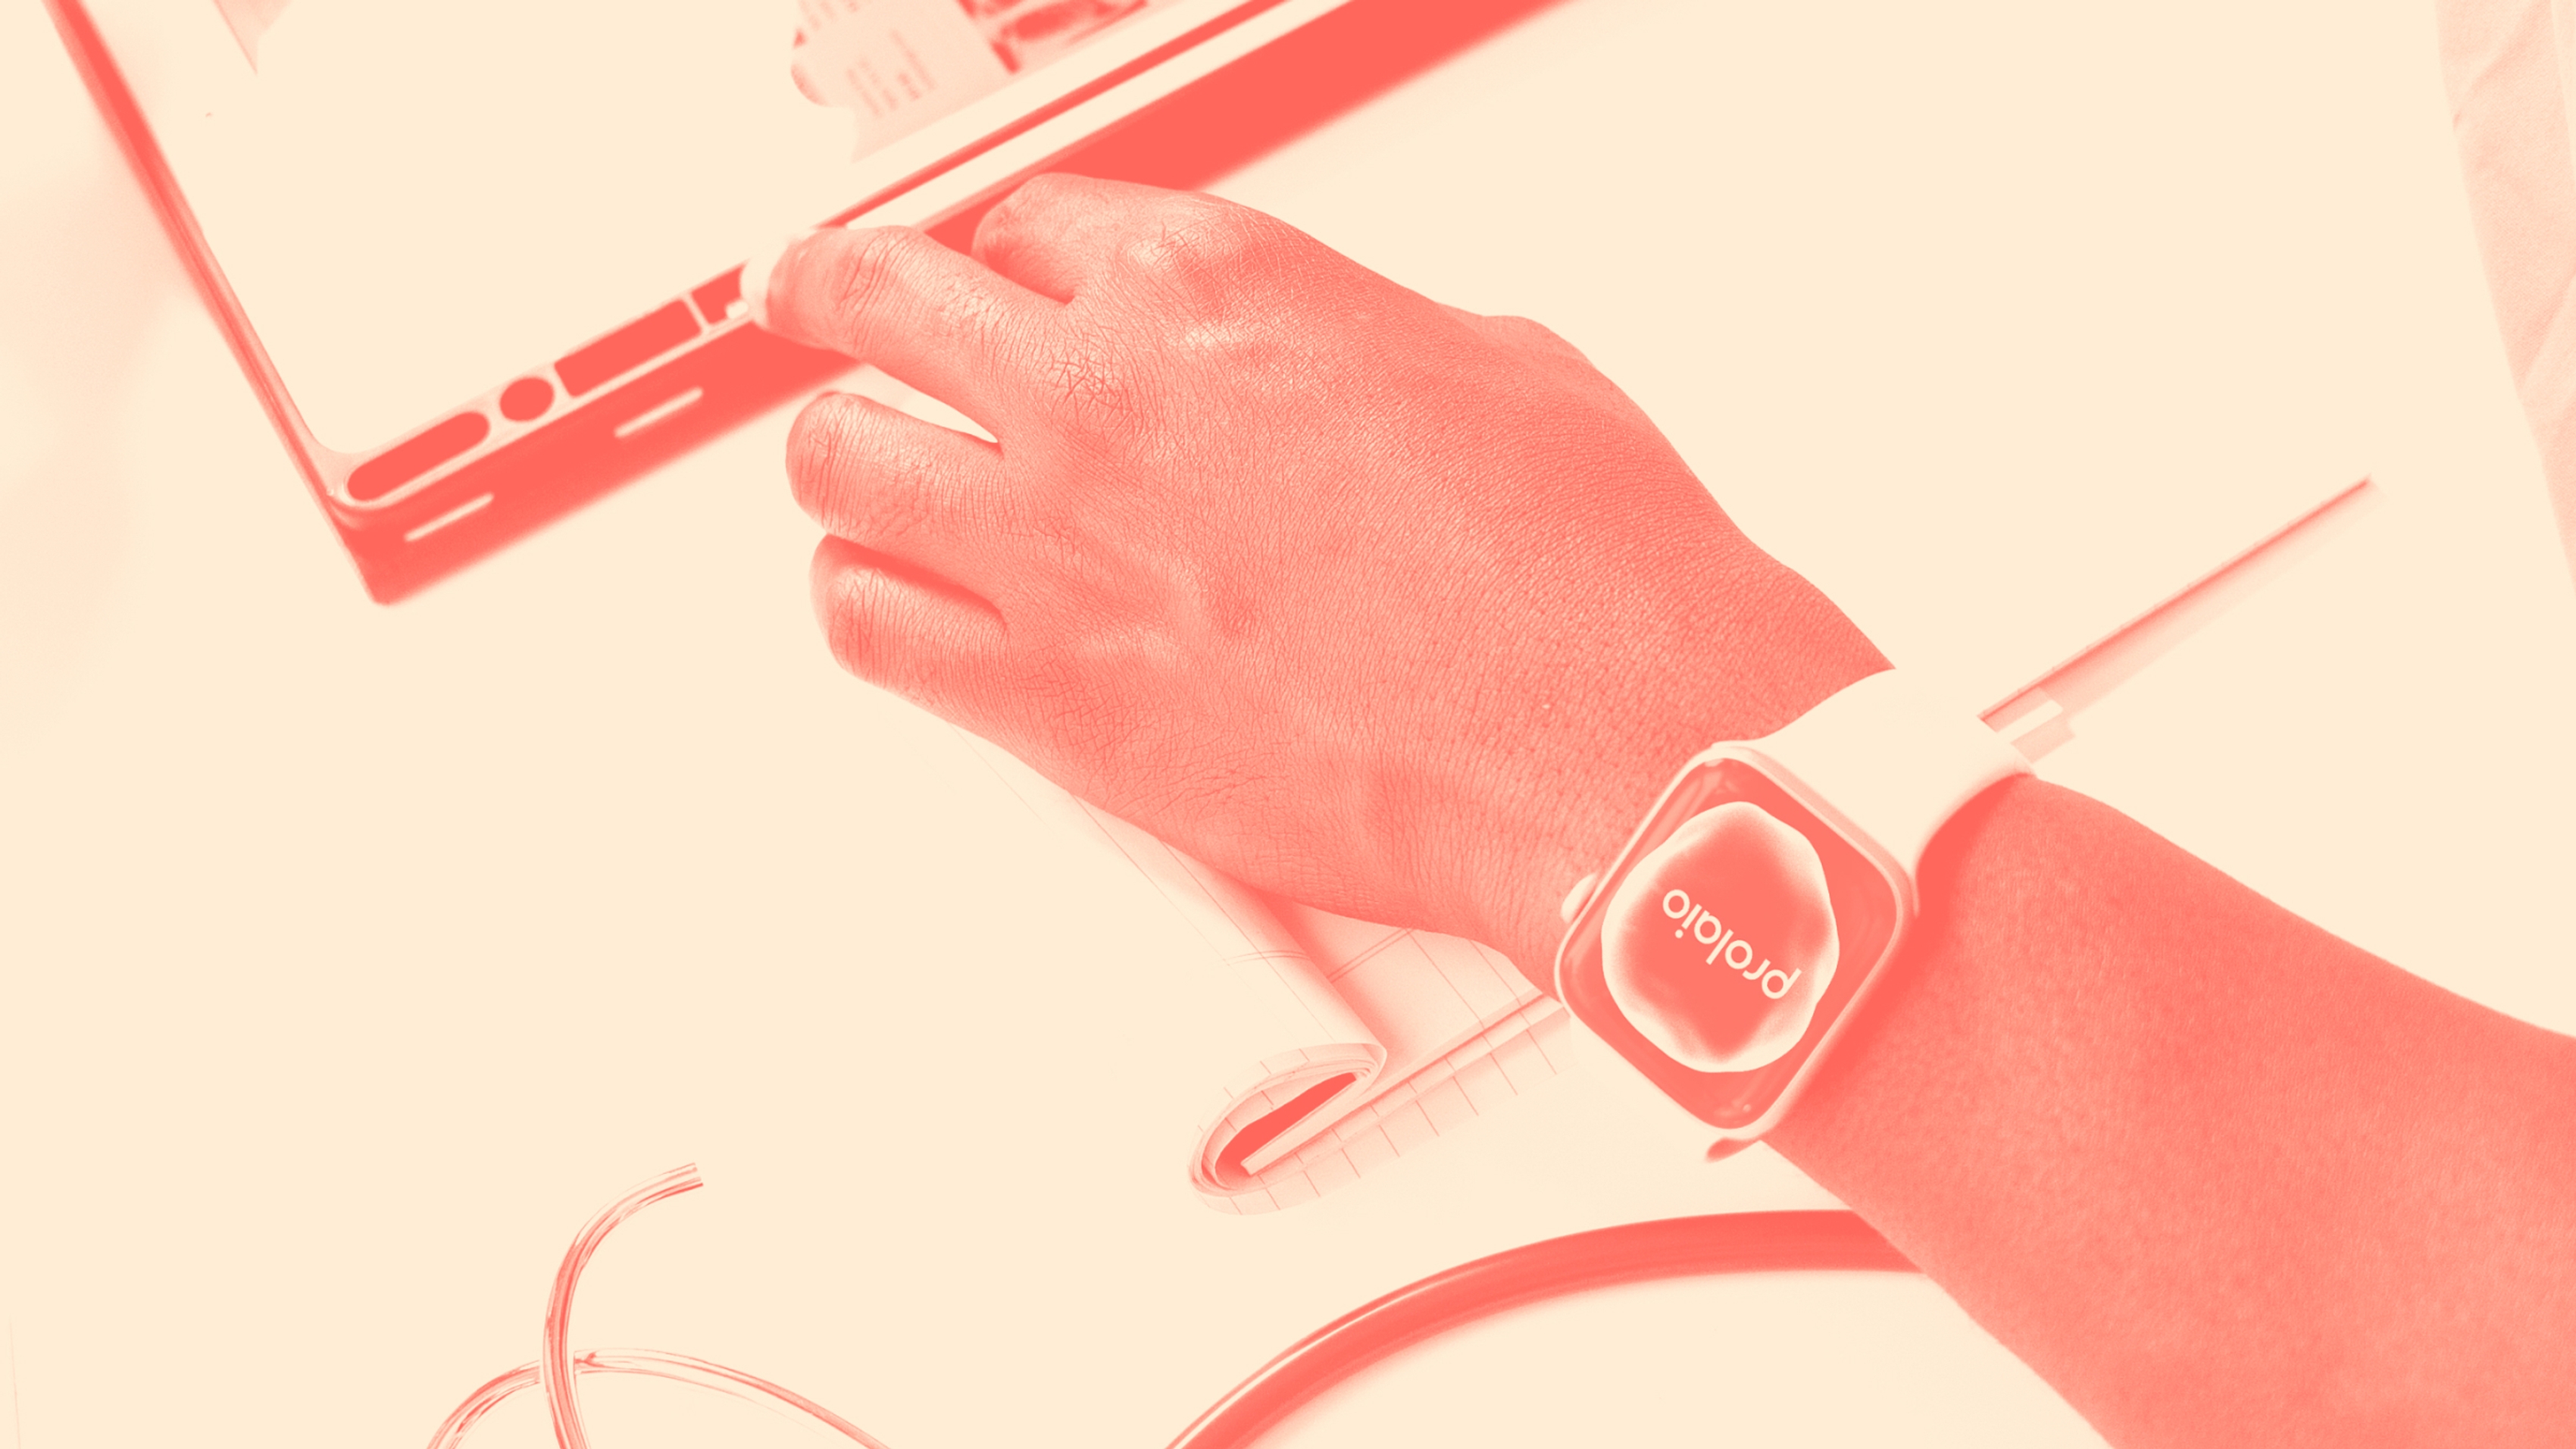 A person's hand showing the Prolaio logo on their Apple watch reaching for a tablet